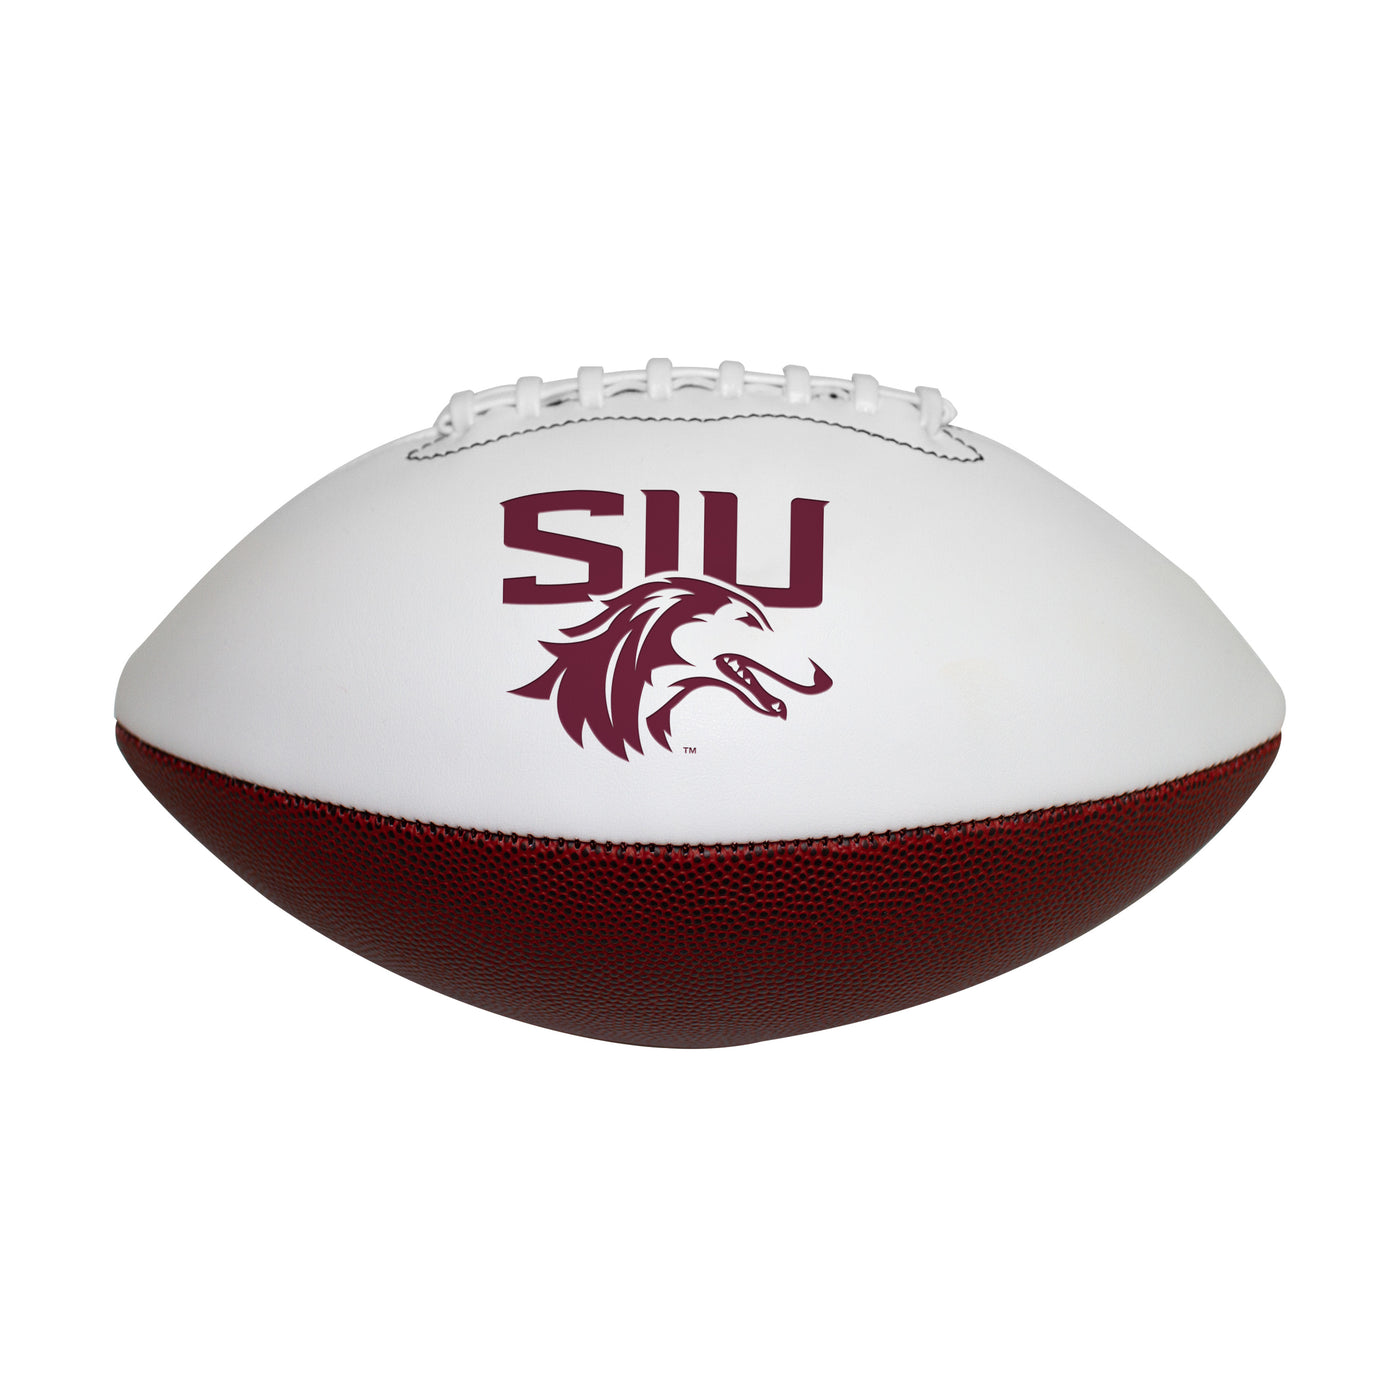 Southern Illinois Official-Size Autograph Football